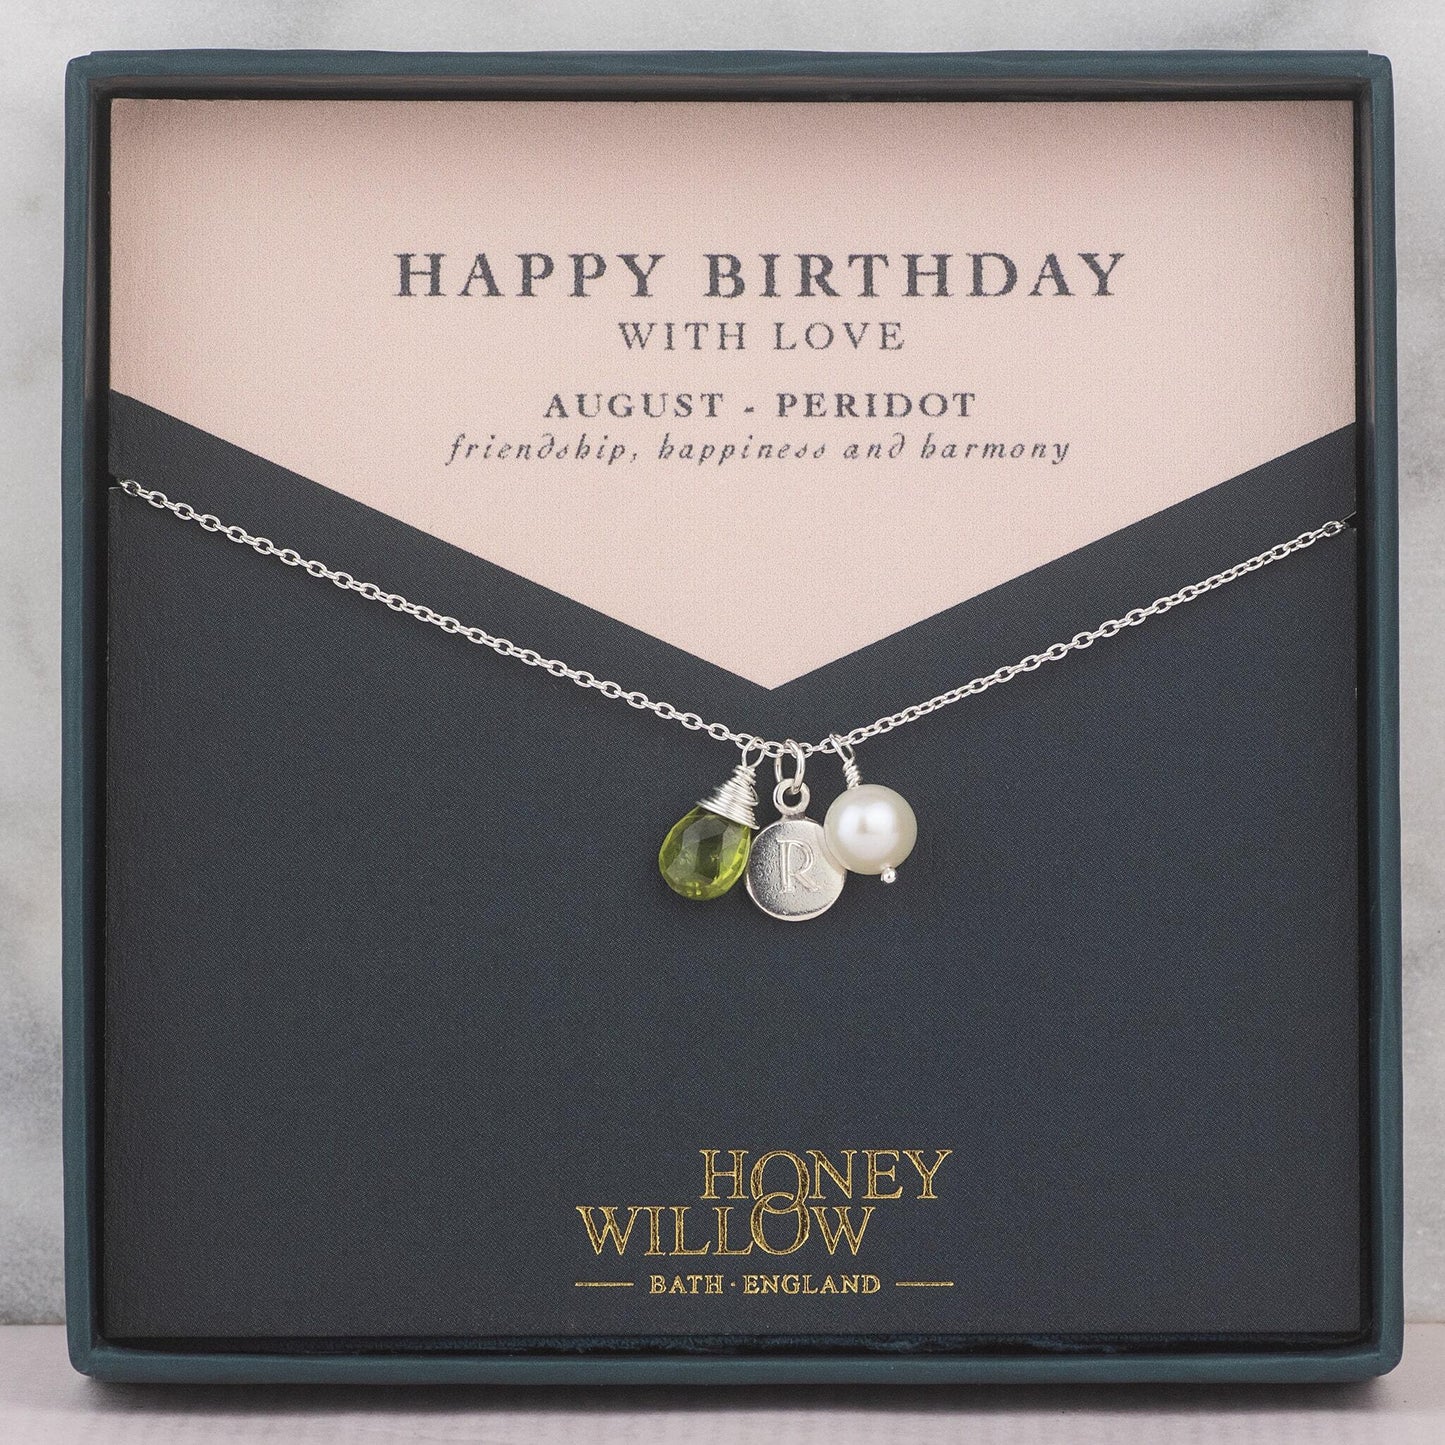 Personalised Initial and Birthstone Necklace